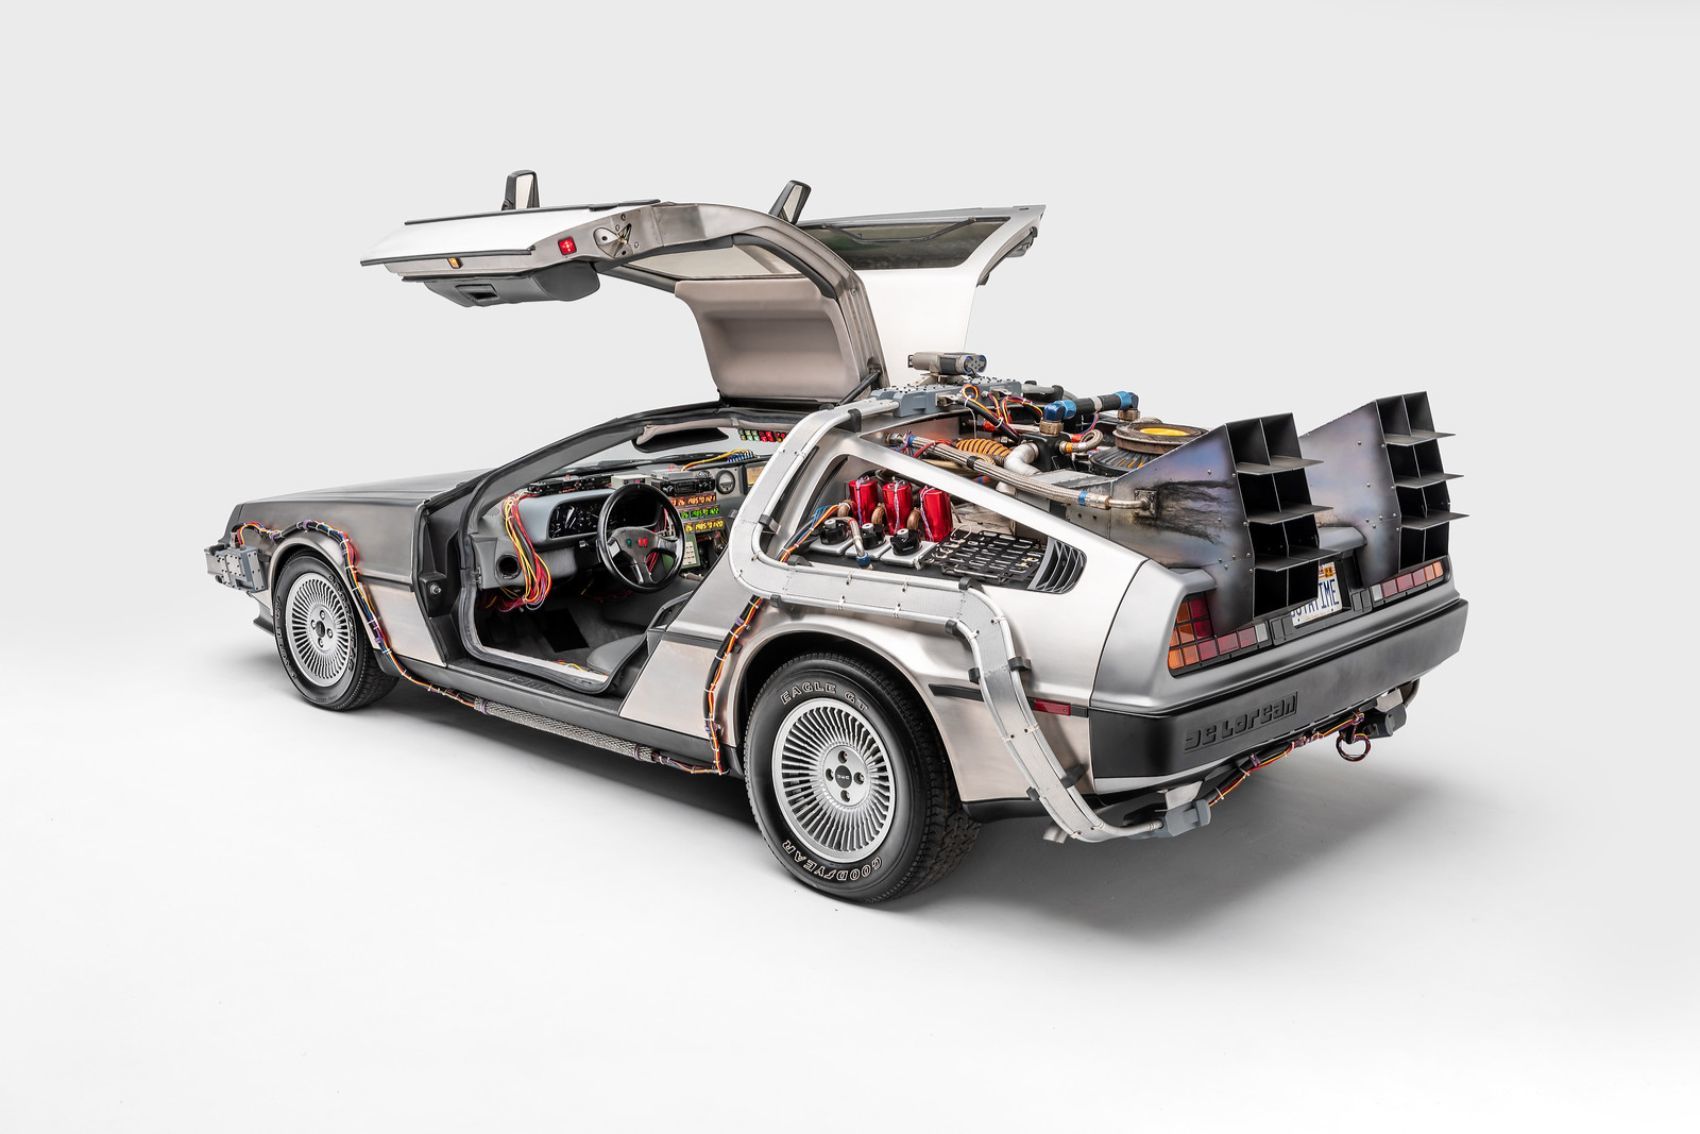 The Back to the Future series is just as enjoyable today as it was 30 years go. We examine some of the technology in the film to see if any of it came true.